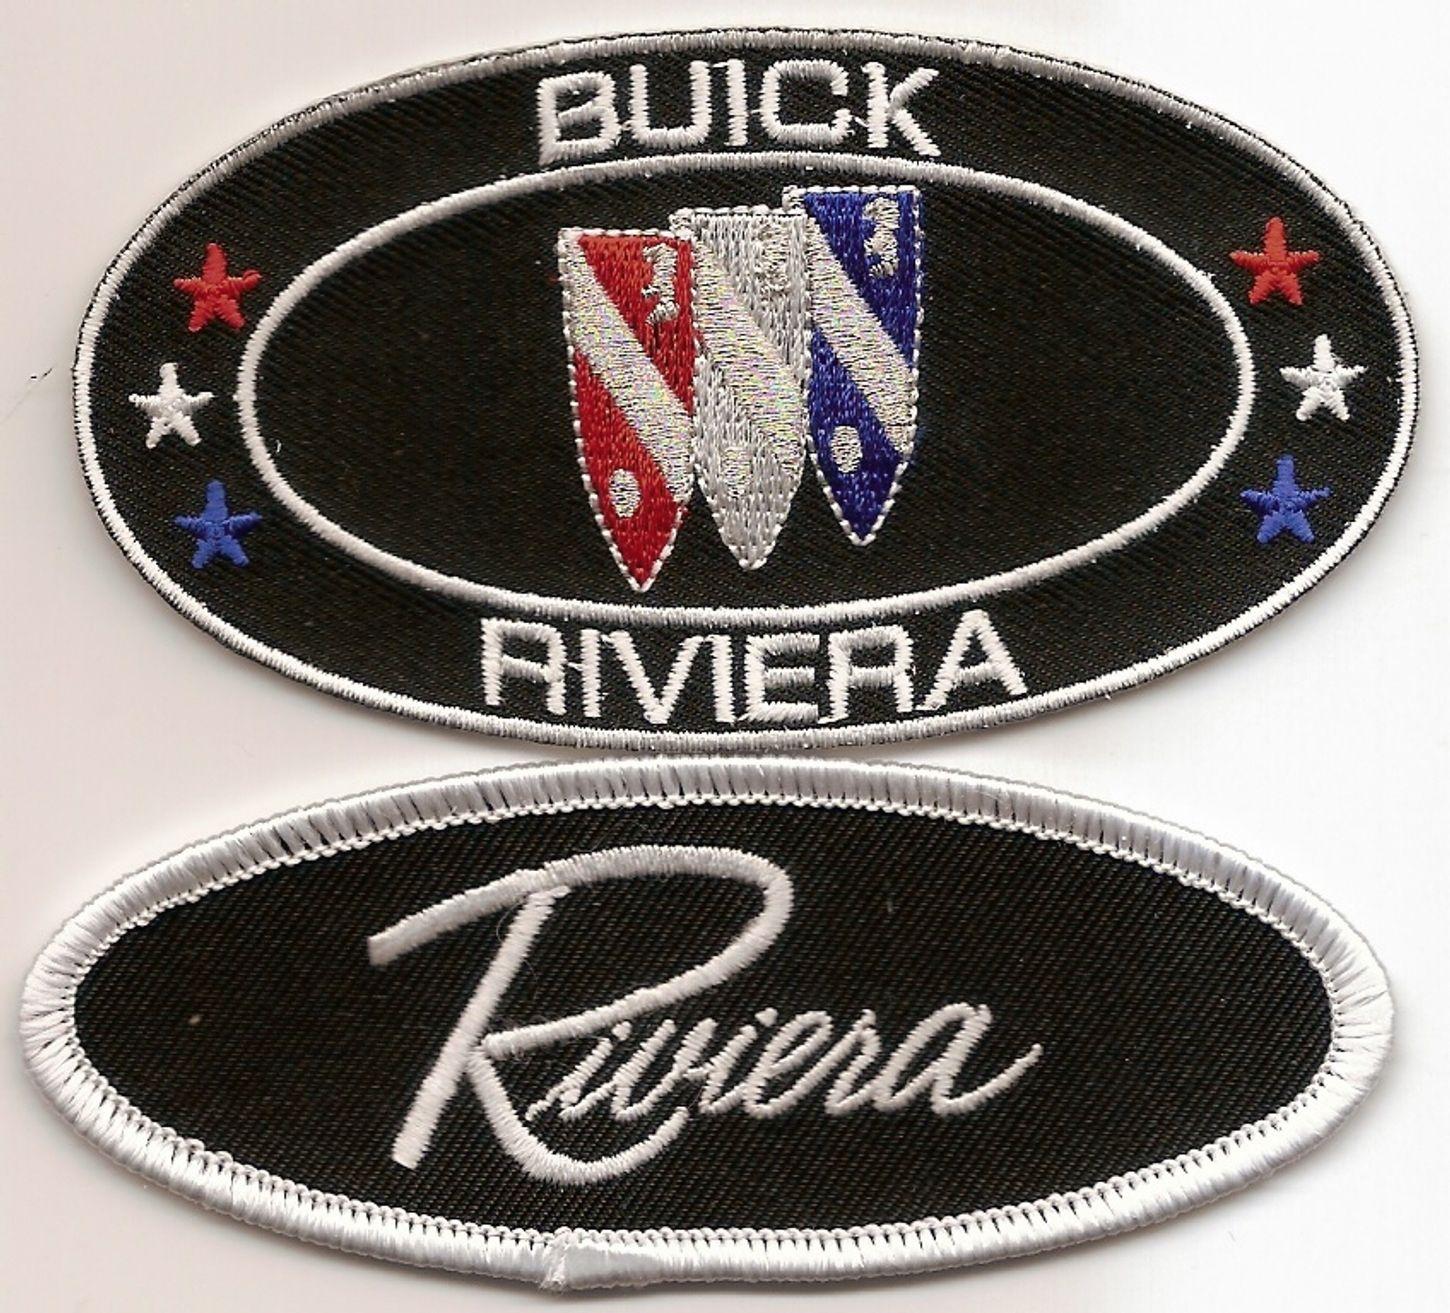 Old Buick Logo - Brand New BUICK Embroidery Logo Iron On Patch GMC Chevy Old Classic ...